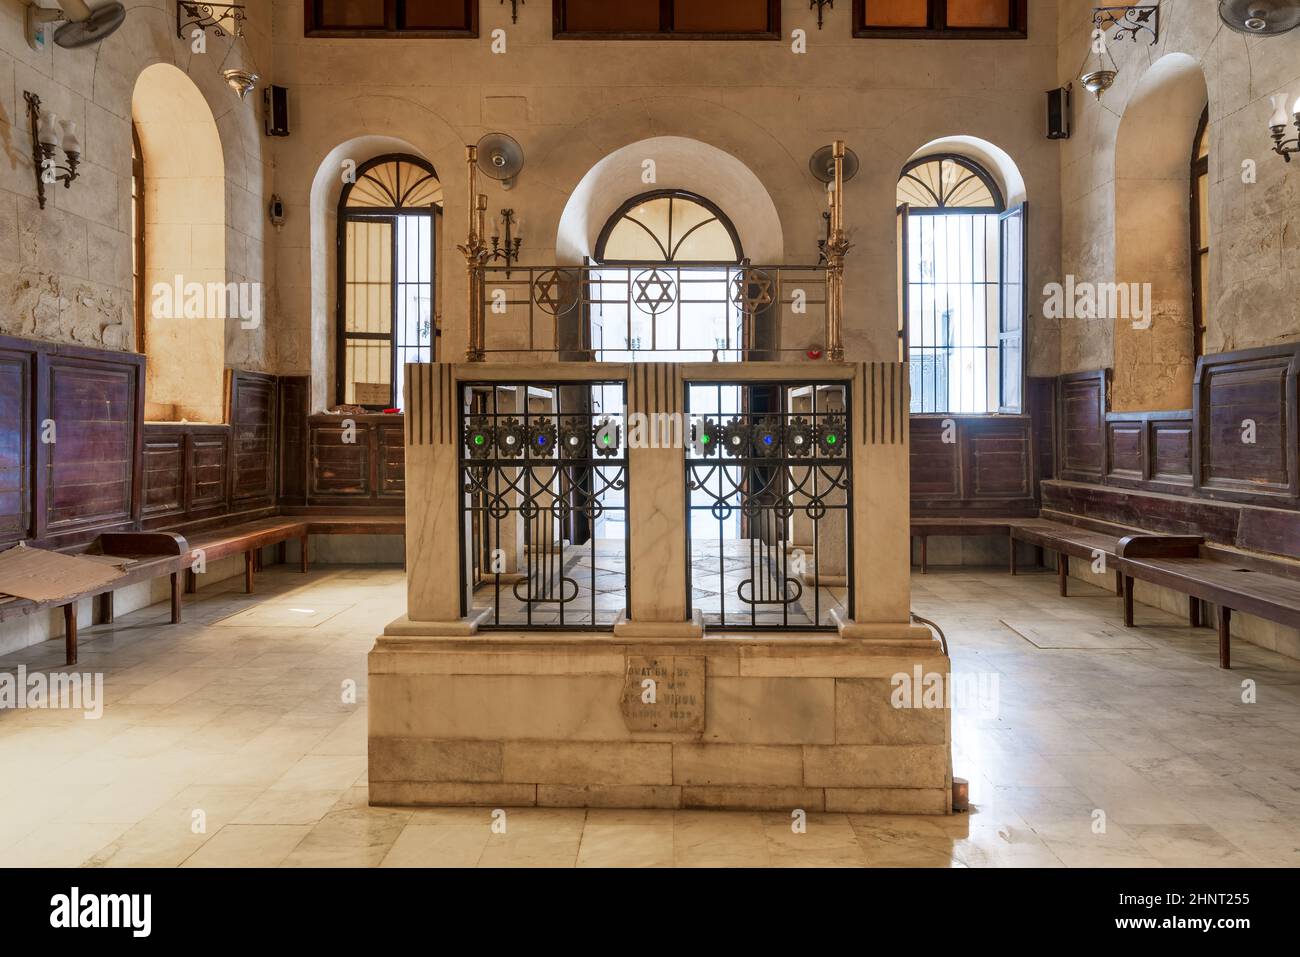 Interior of historic Jewish Maimonides Synagogue or Rav Moshe Synagogue with altar in front, Cairo Egypt Stock Photo